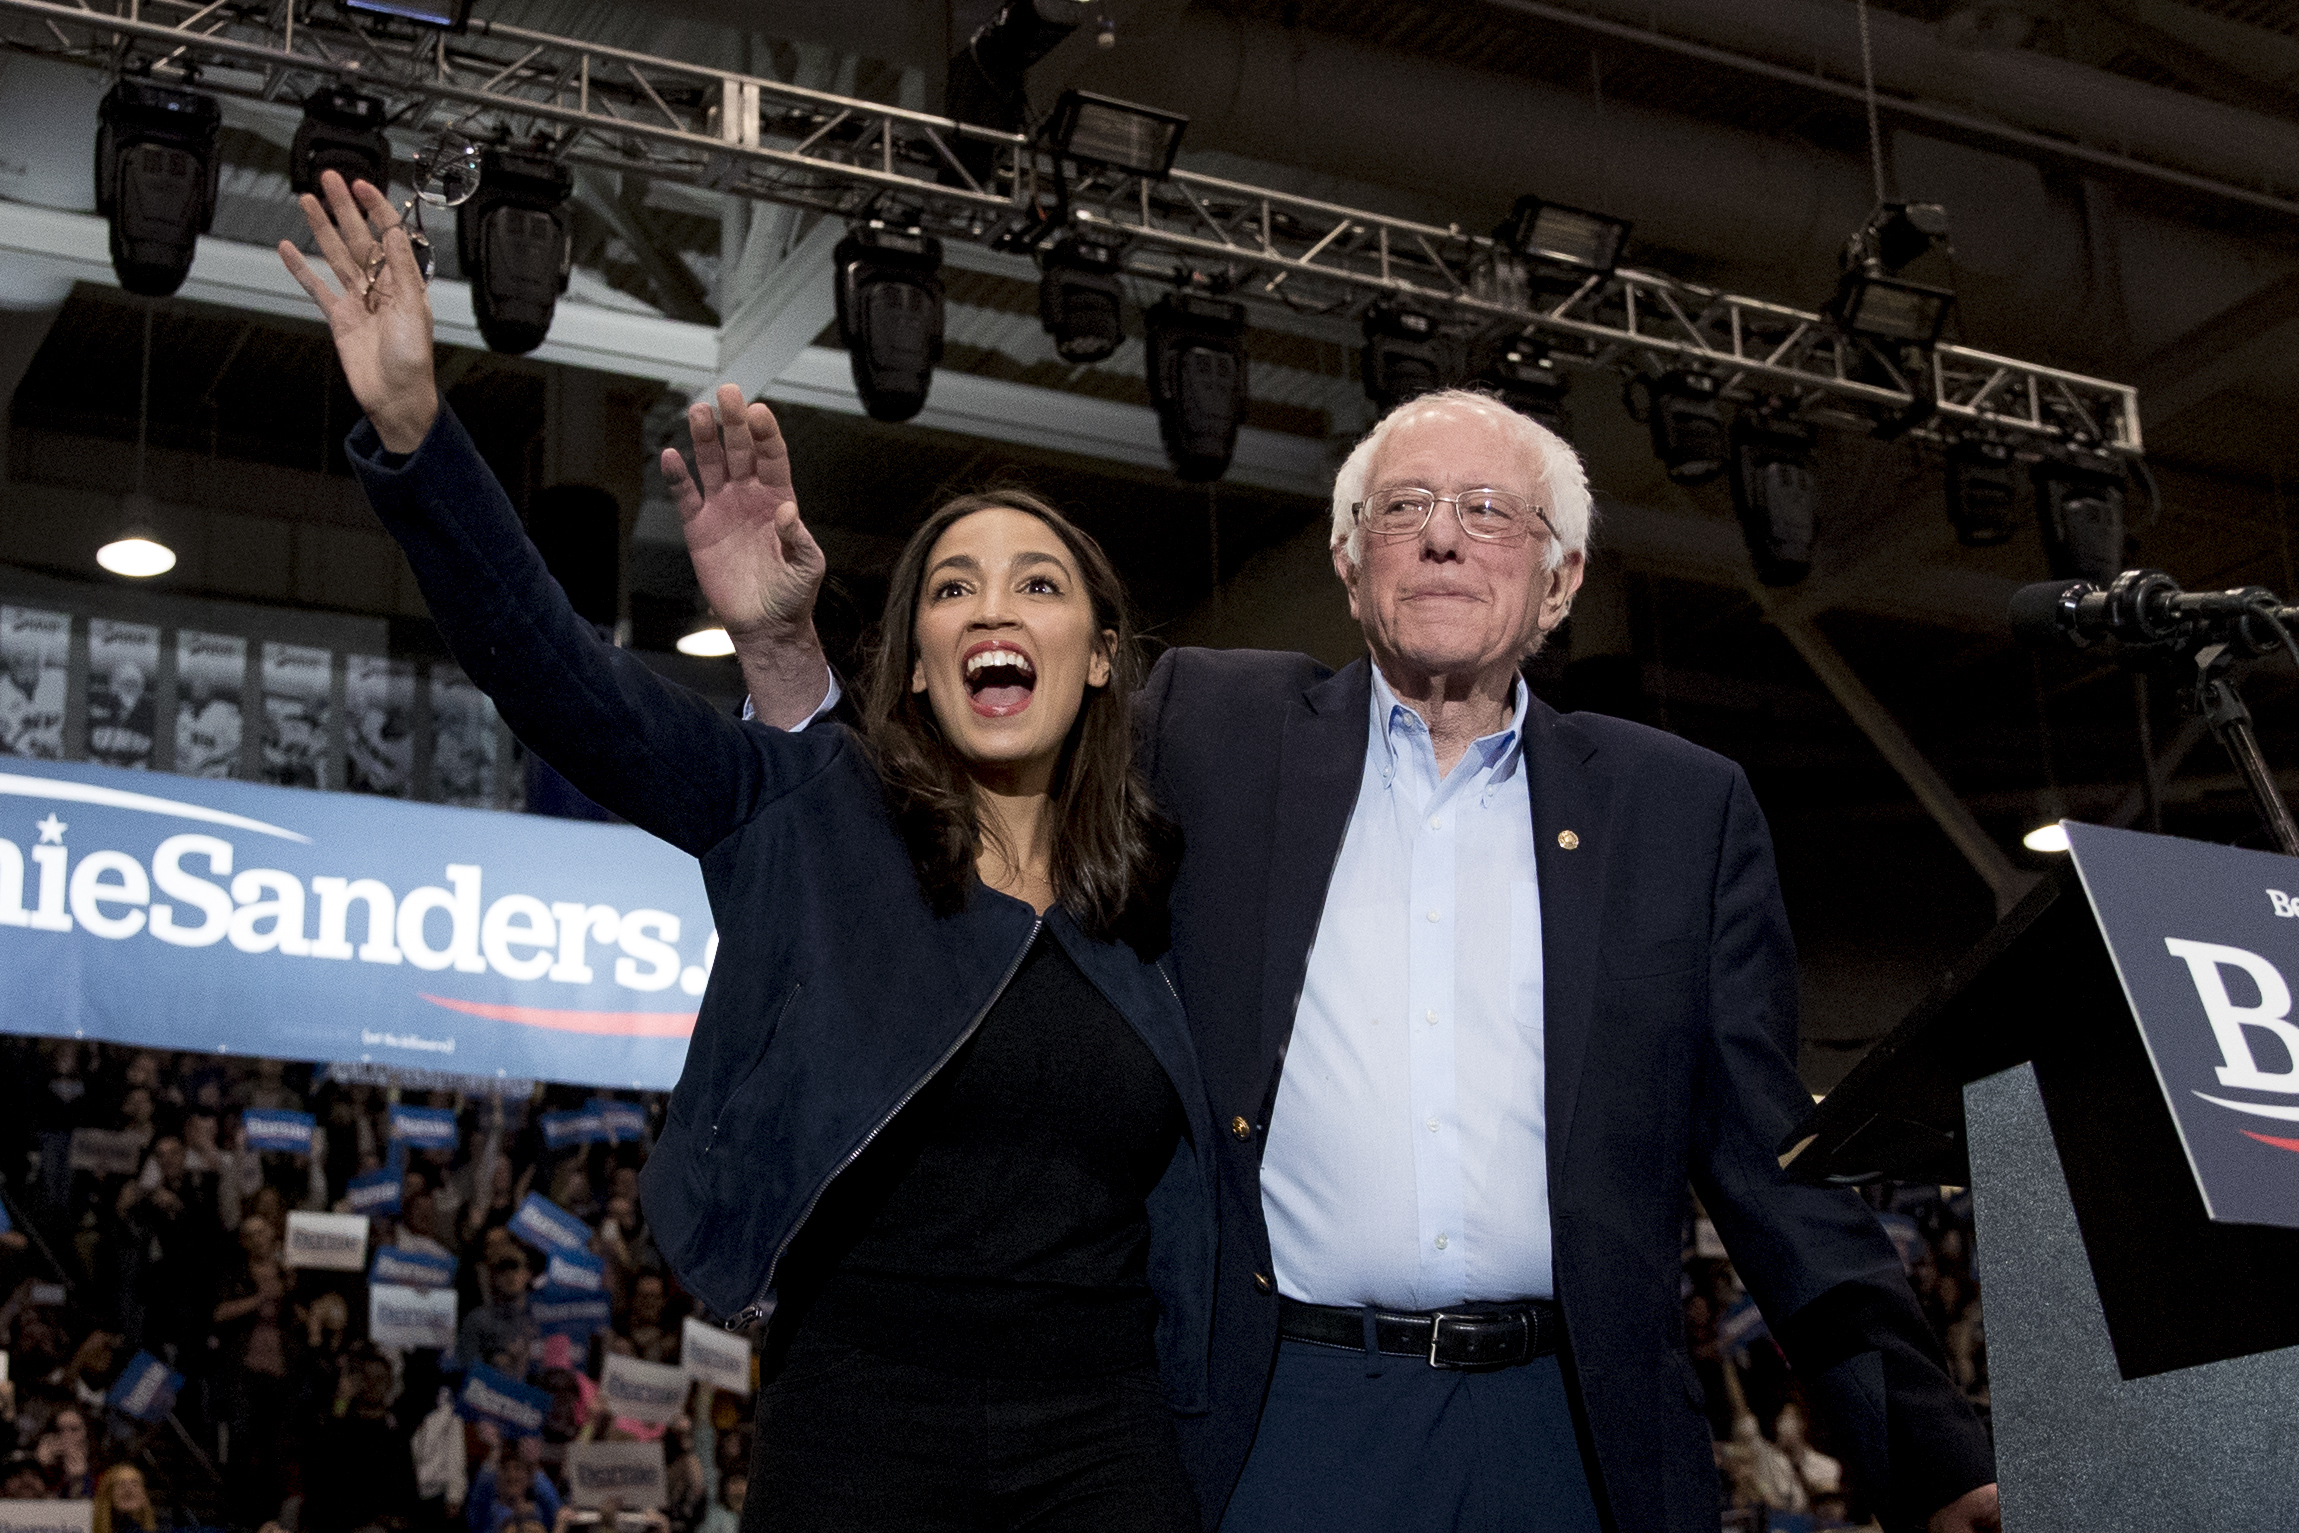 Sen. Bernie Sanders, I-Vt., is accompanied by Rep. Alexandria Ocasio-Cortez, D-N.Y., left, at the University of New Hampshire in Durham, N.H.